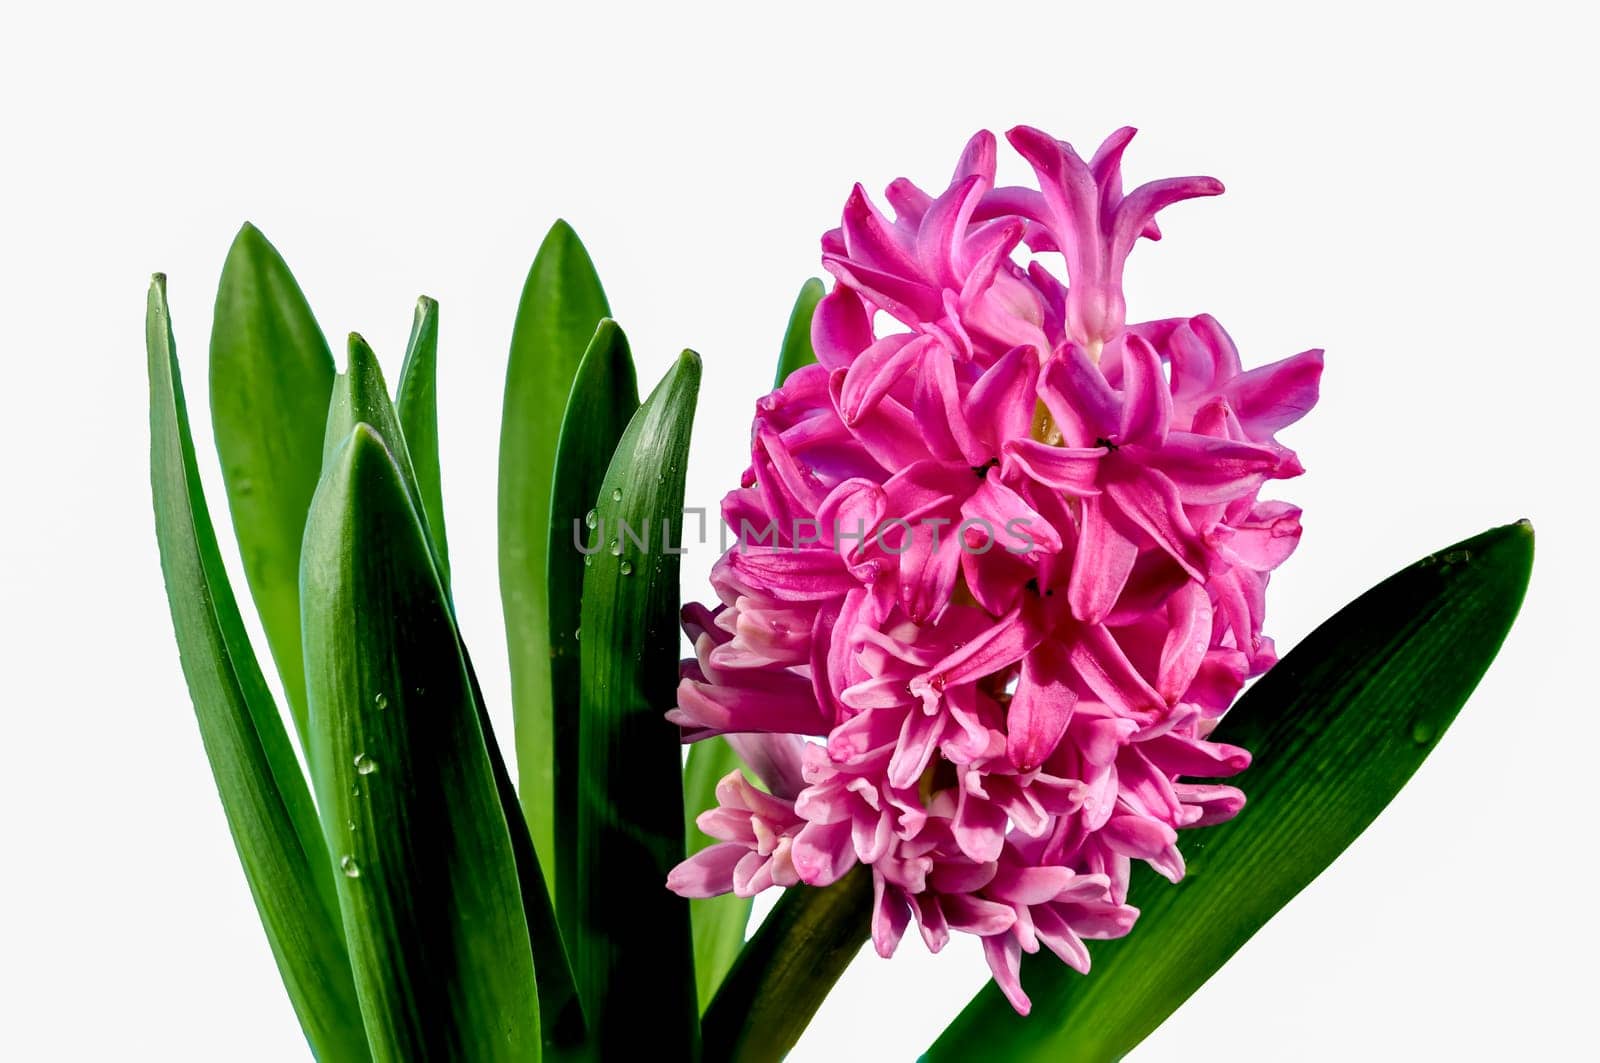 Pink Hyacinth flower on a white background by Multipedia